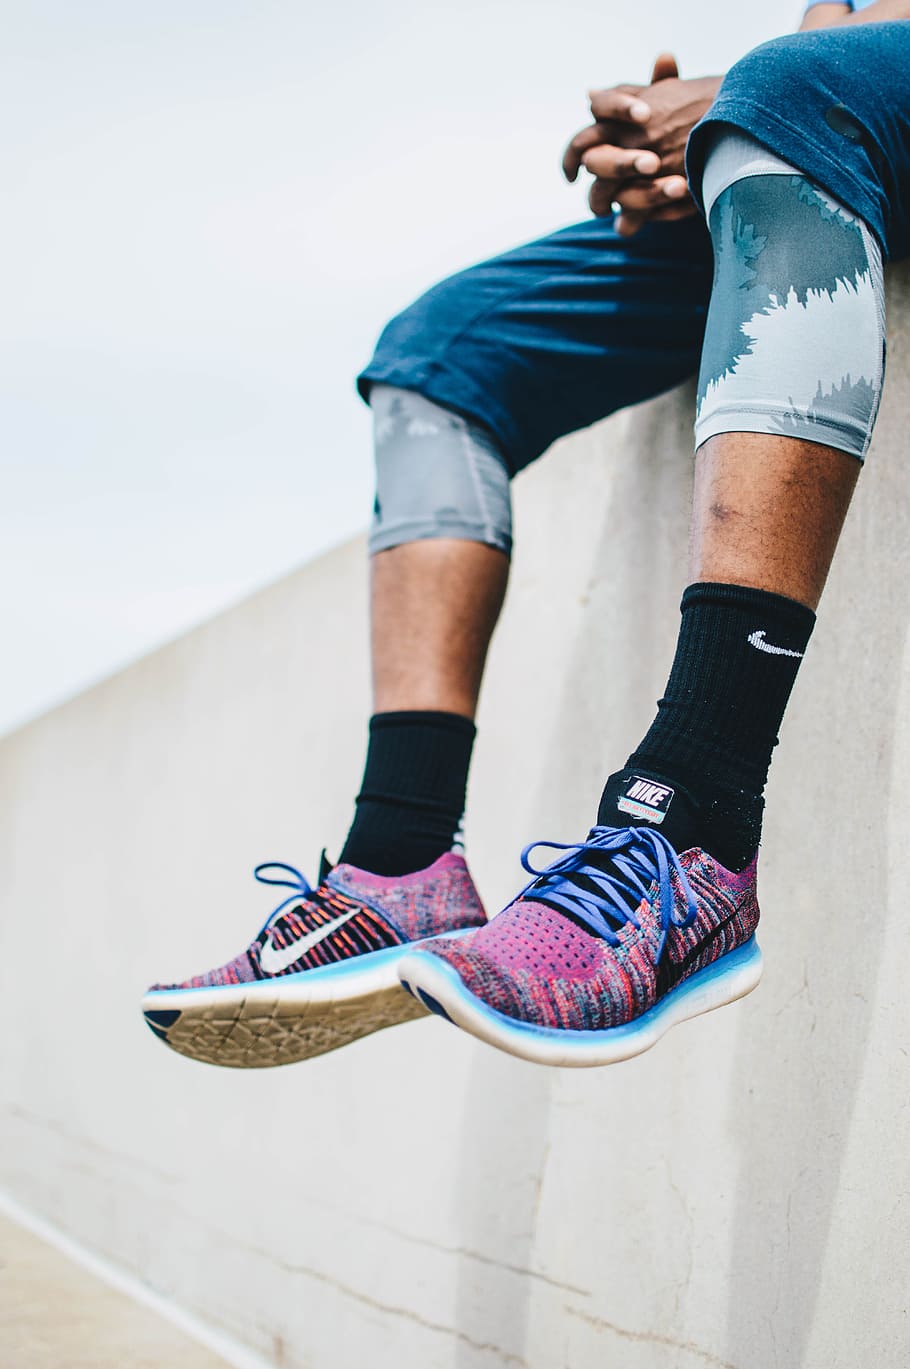 man sitting on the edge of a concrete building wearing Nike running shoes during day, photo of person sitting and wearing purple Nike shoes and black sock, HD wallpaper